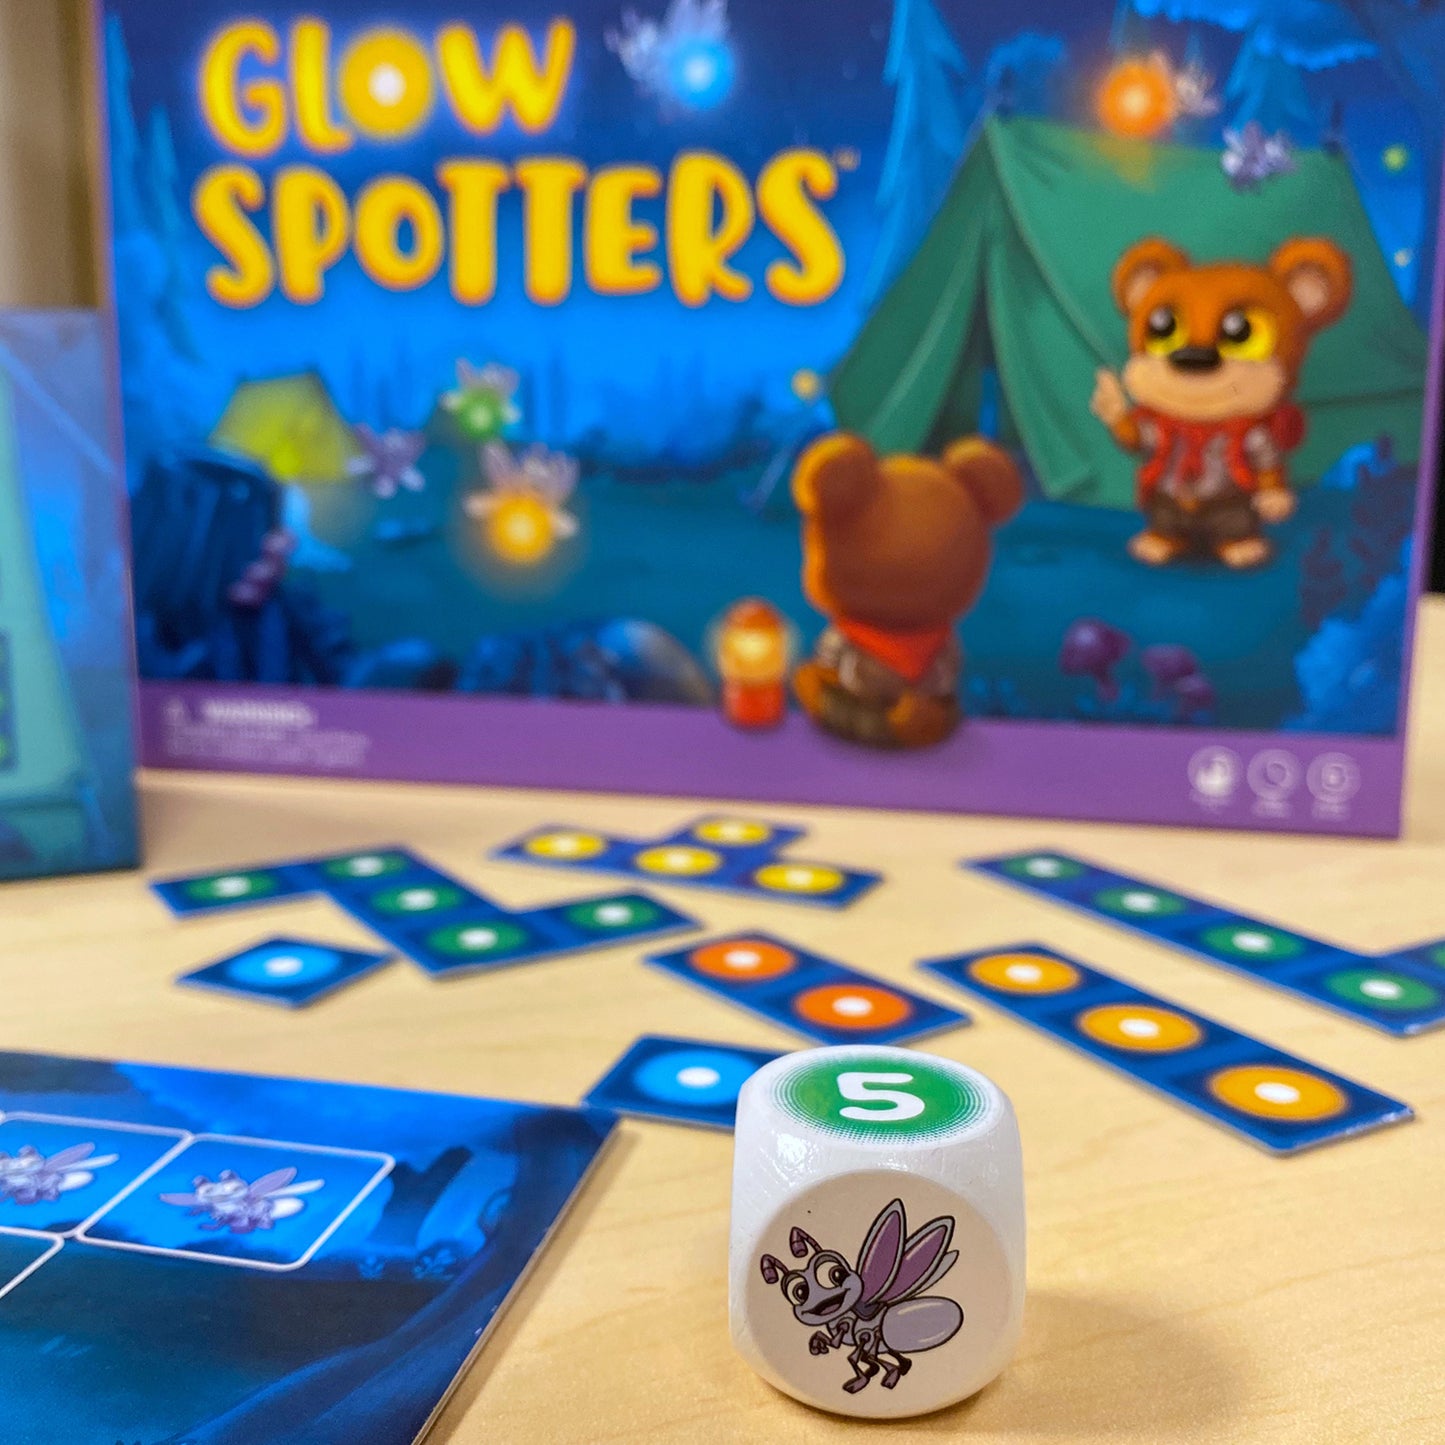 Glow Spotters by SimplyFun is an early addition game which also helps with spatial reasoning for ages 5 and up.